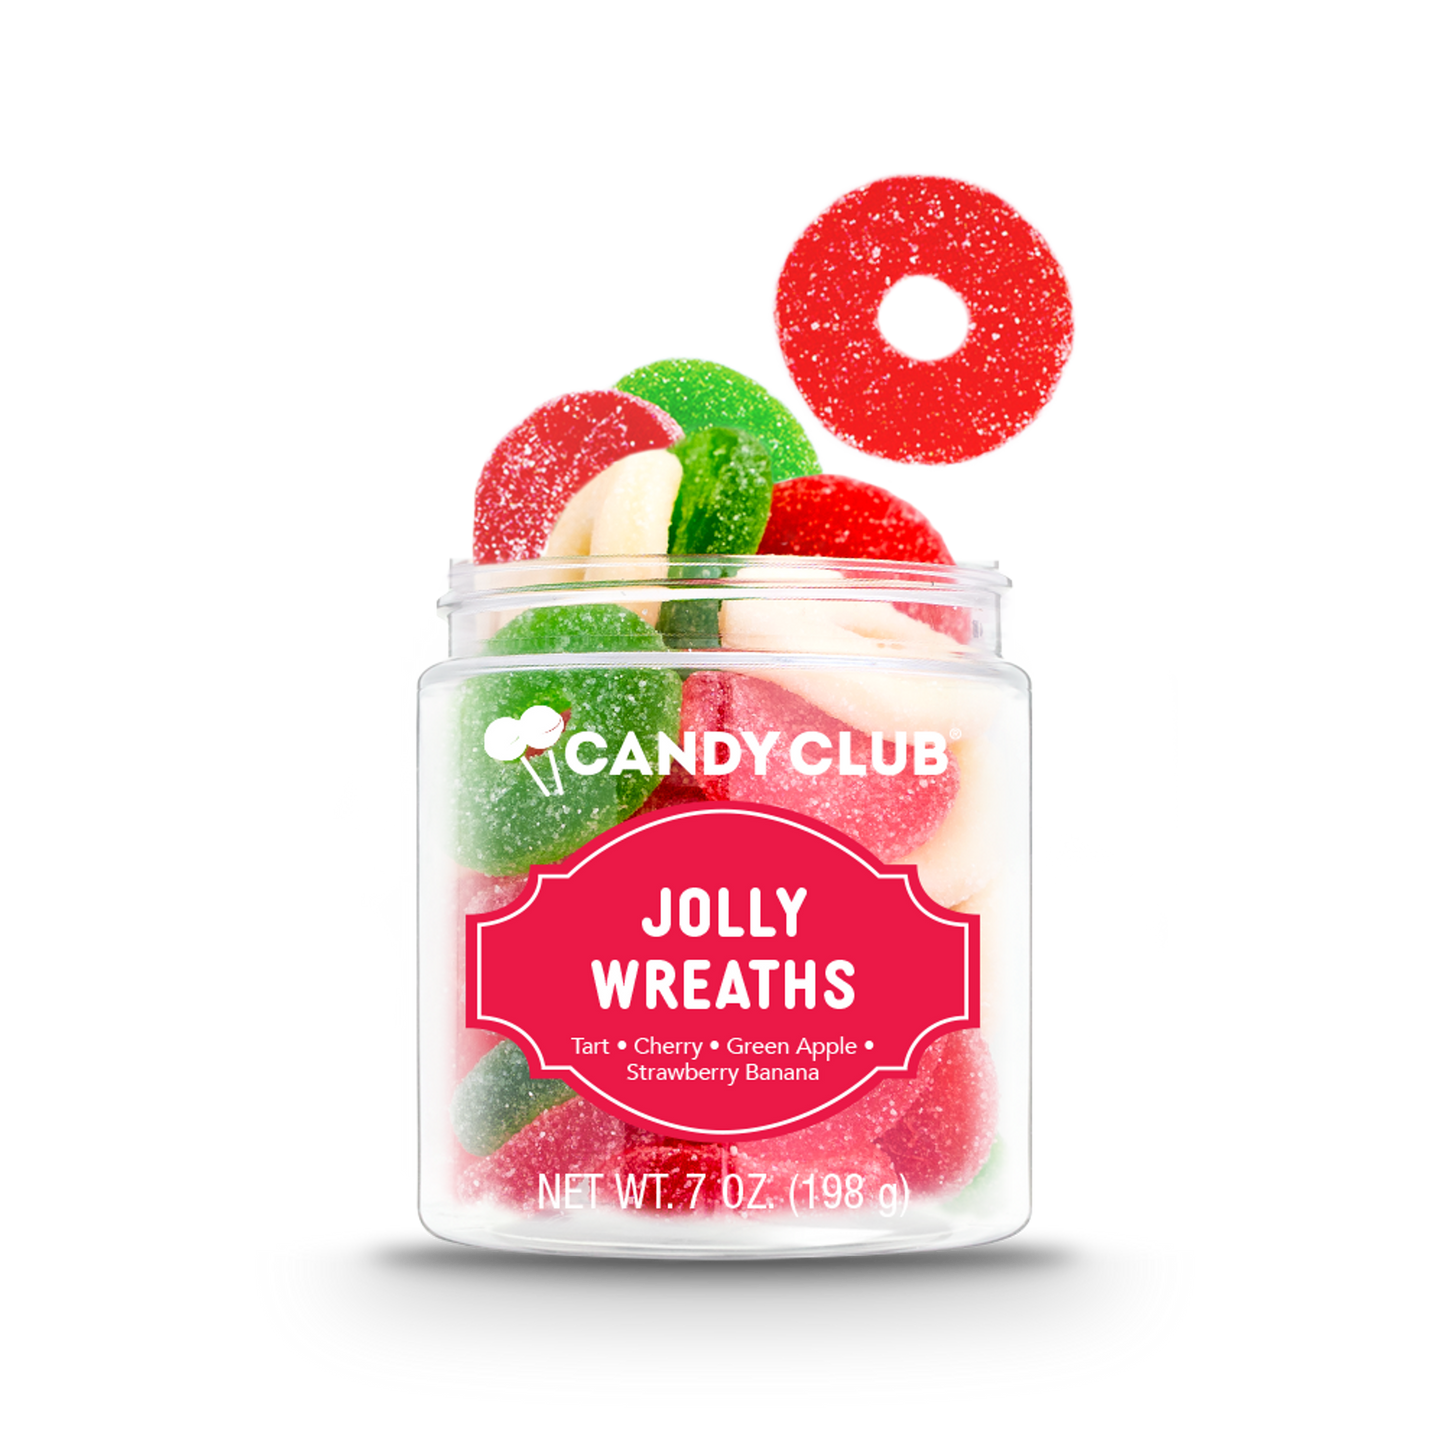 Jolly Wreaths - Candy Club Gummy Rings - Retail Swag candy